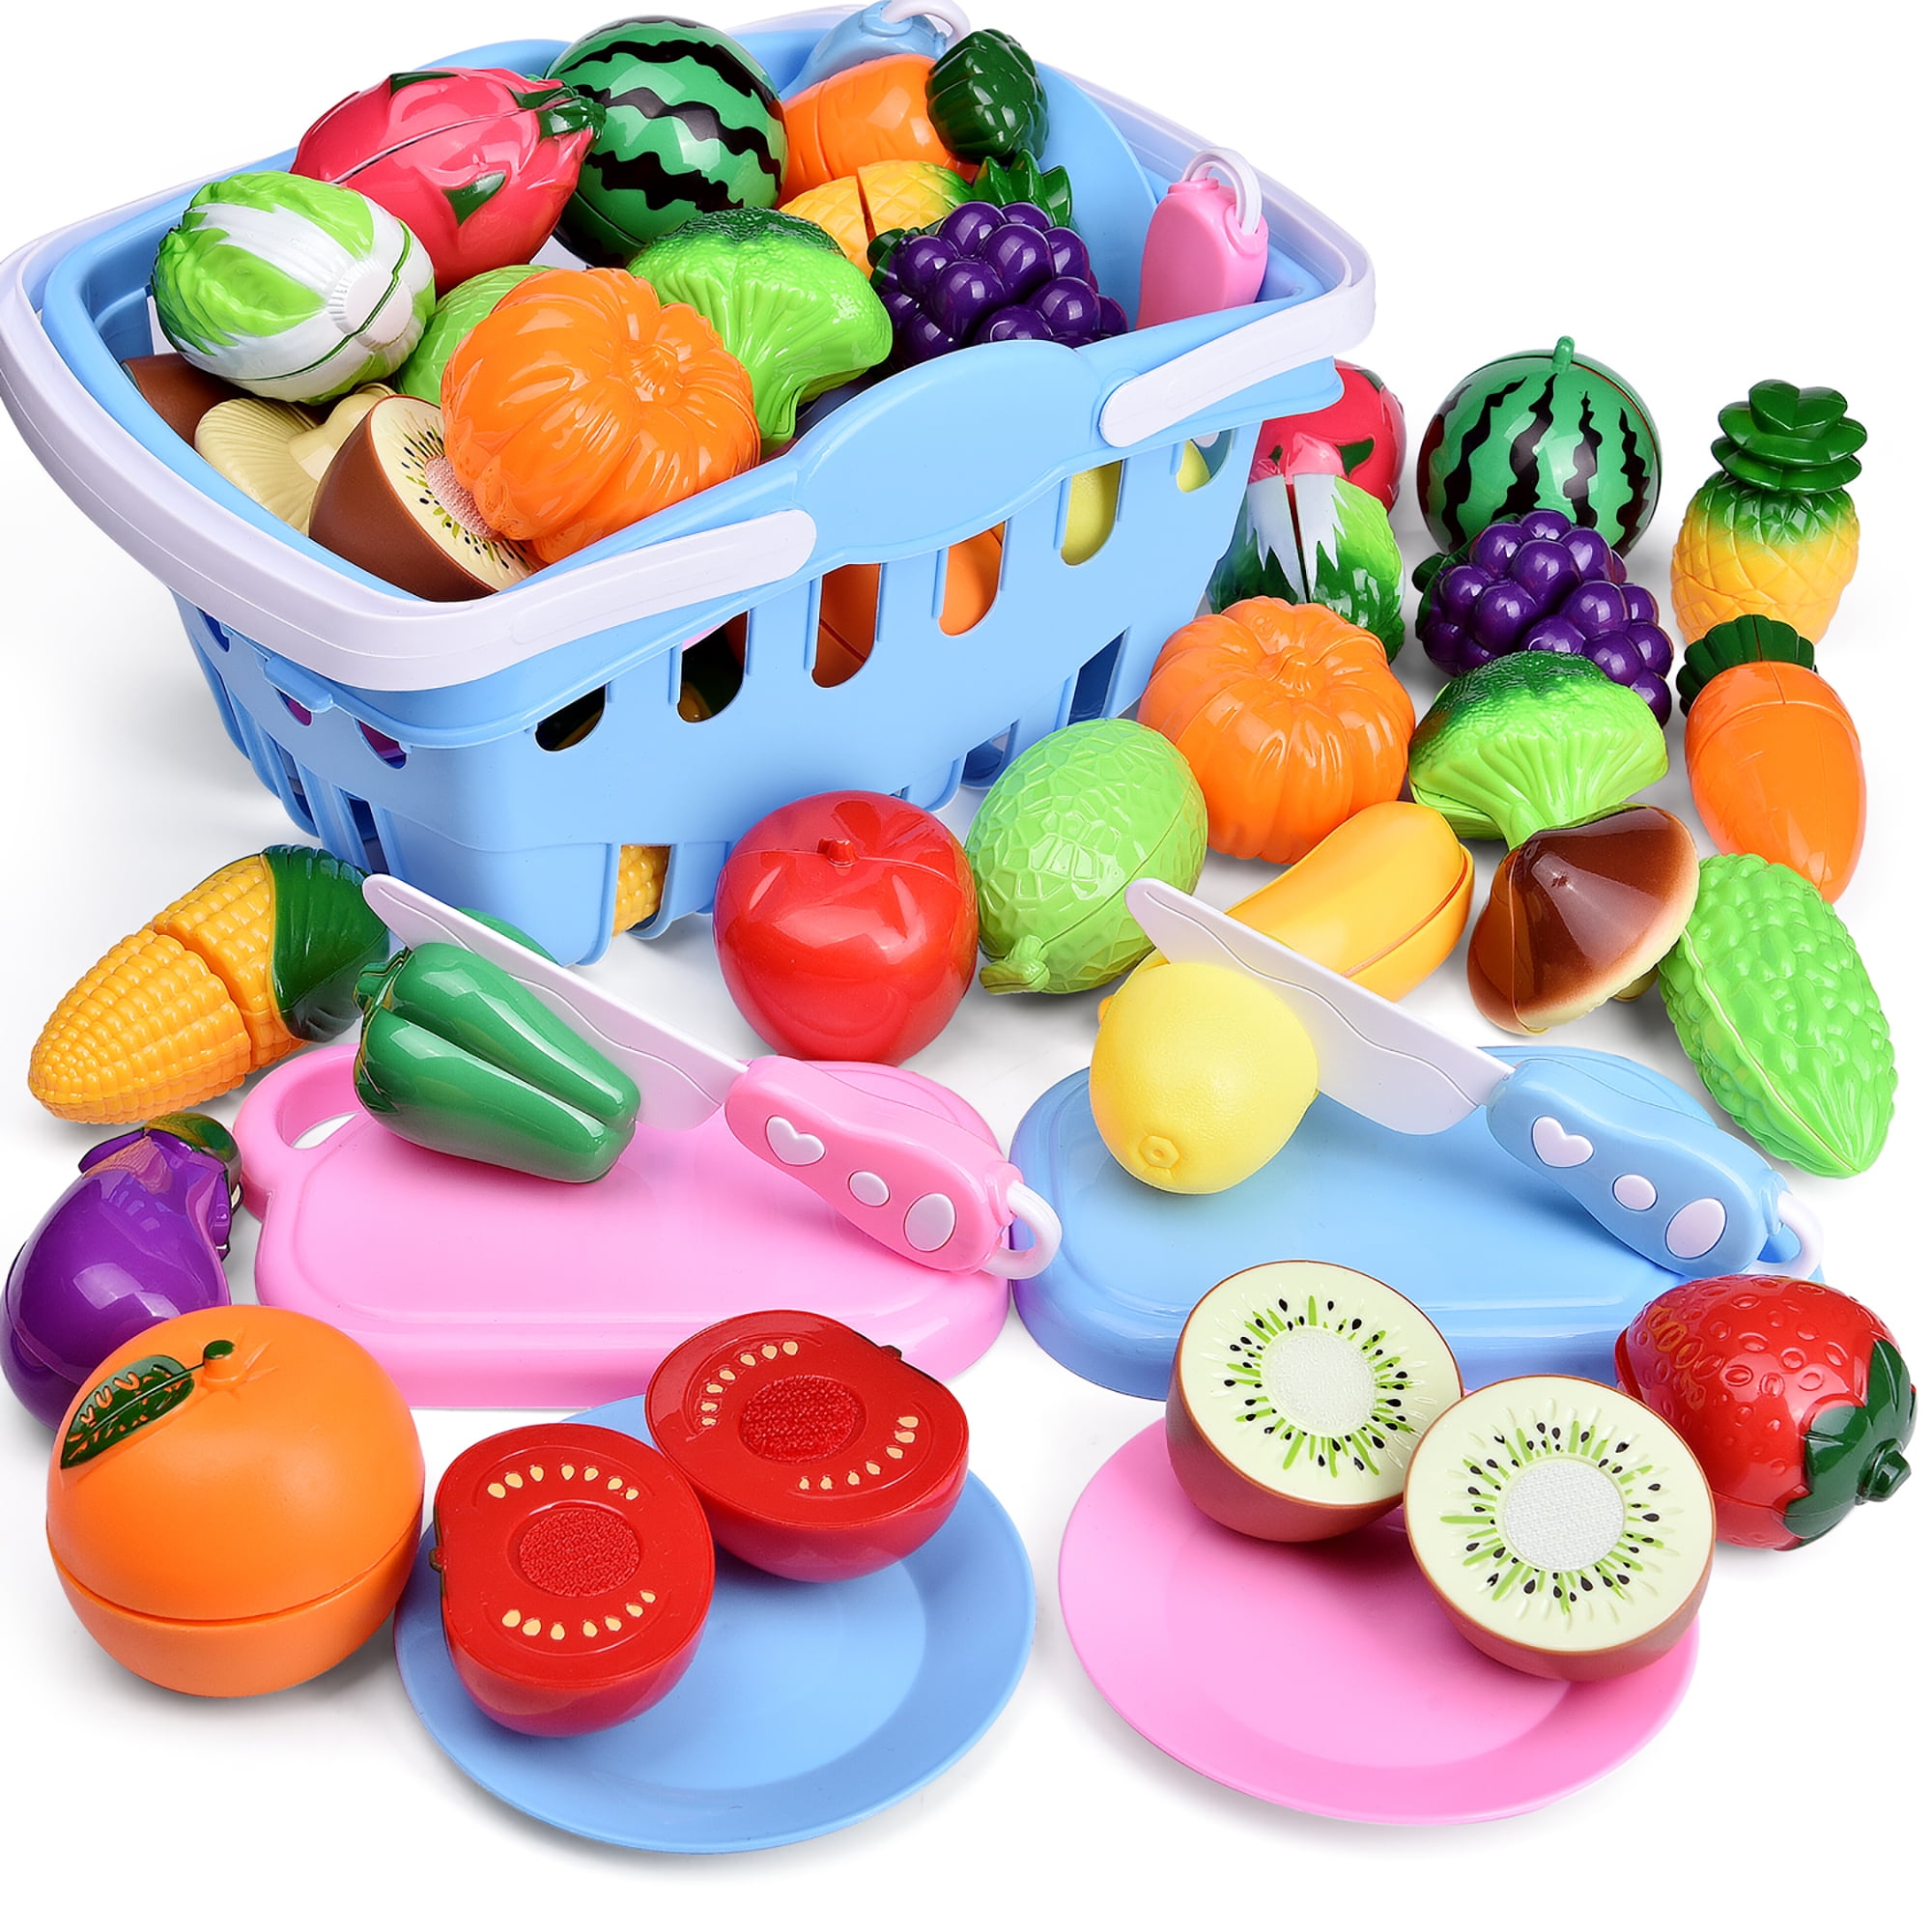 NEW in bag. Lot of 3 18pcs Assorted Food ~ Cutable Sliceable Play Food 